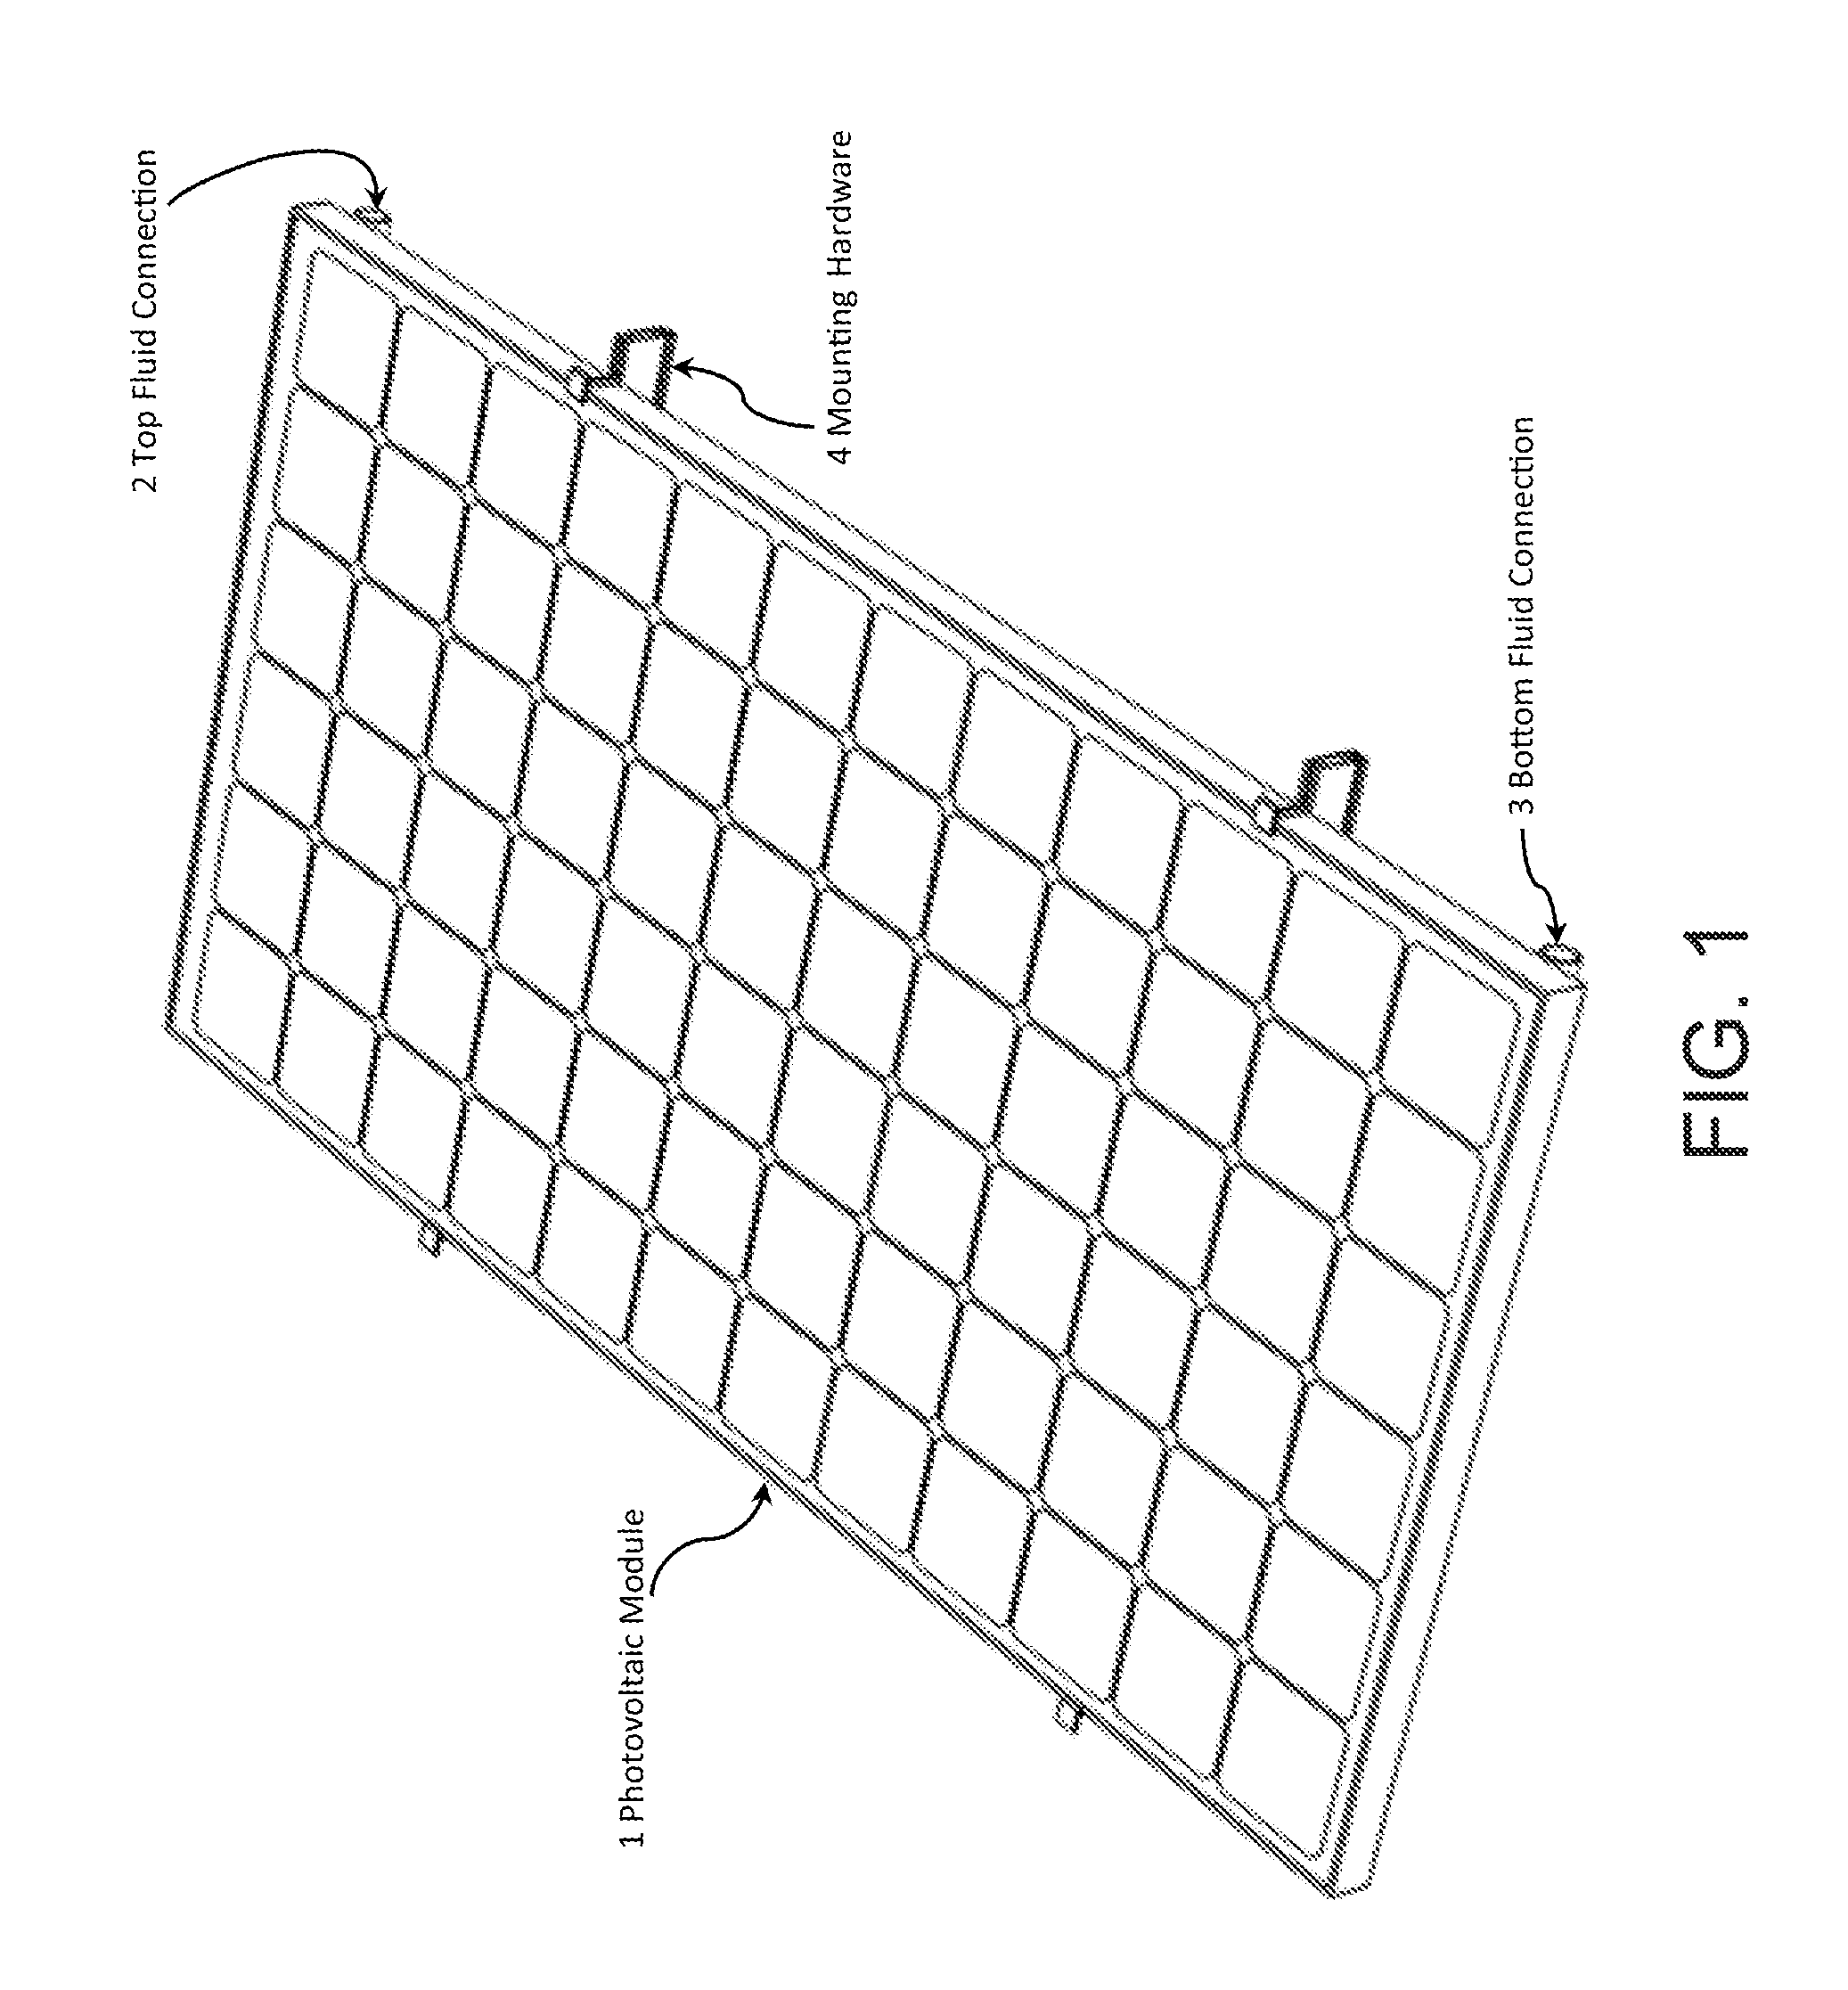 Fluid cooled integrated photovoltaic module